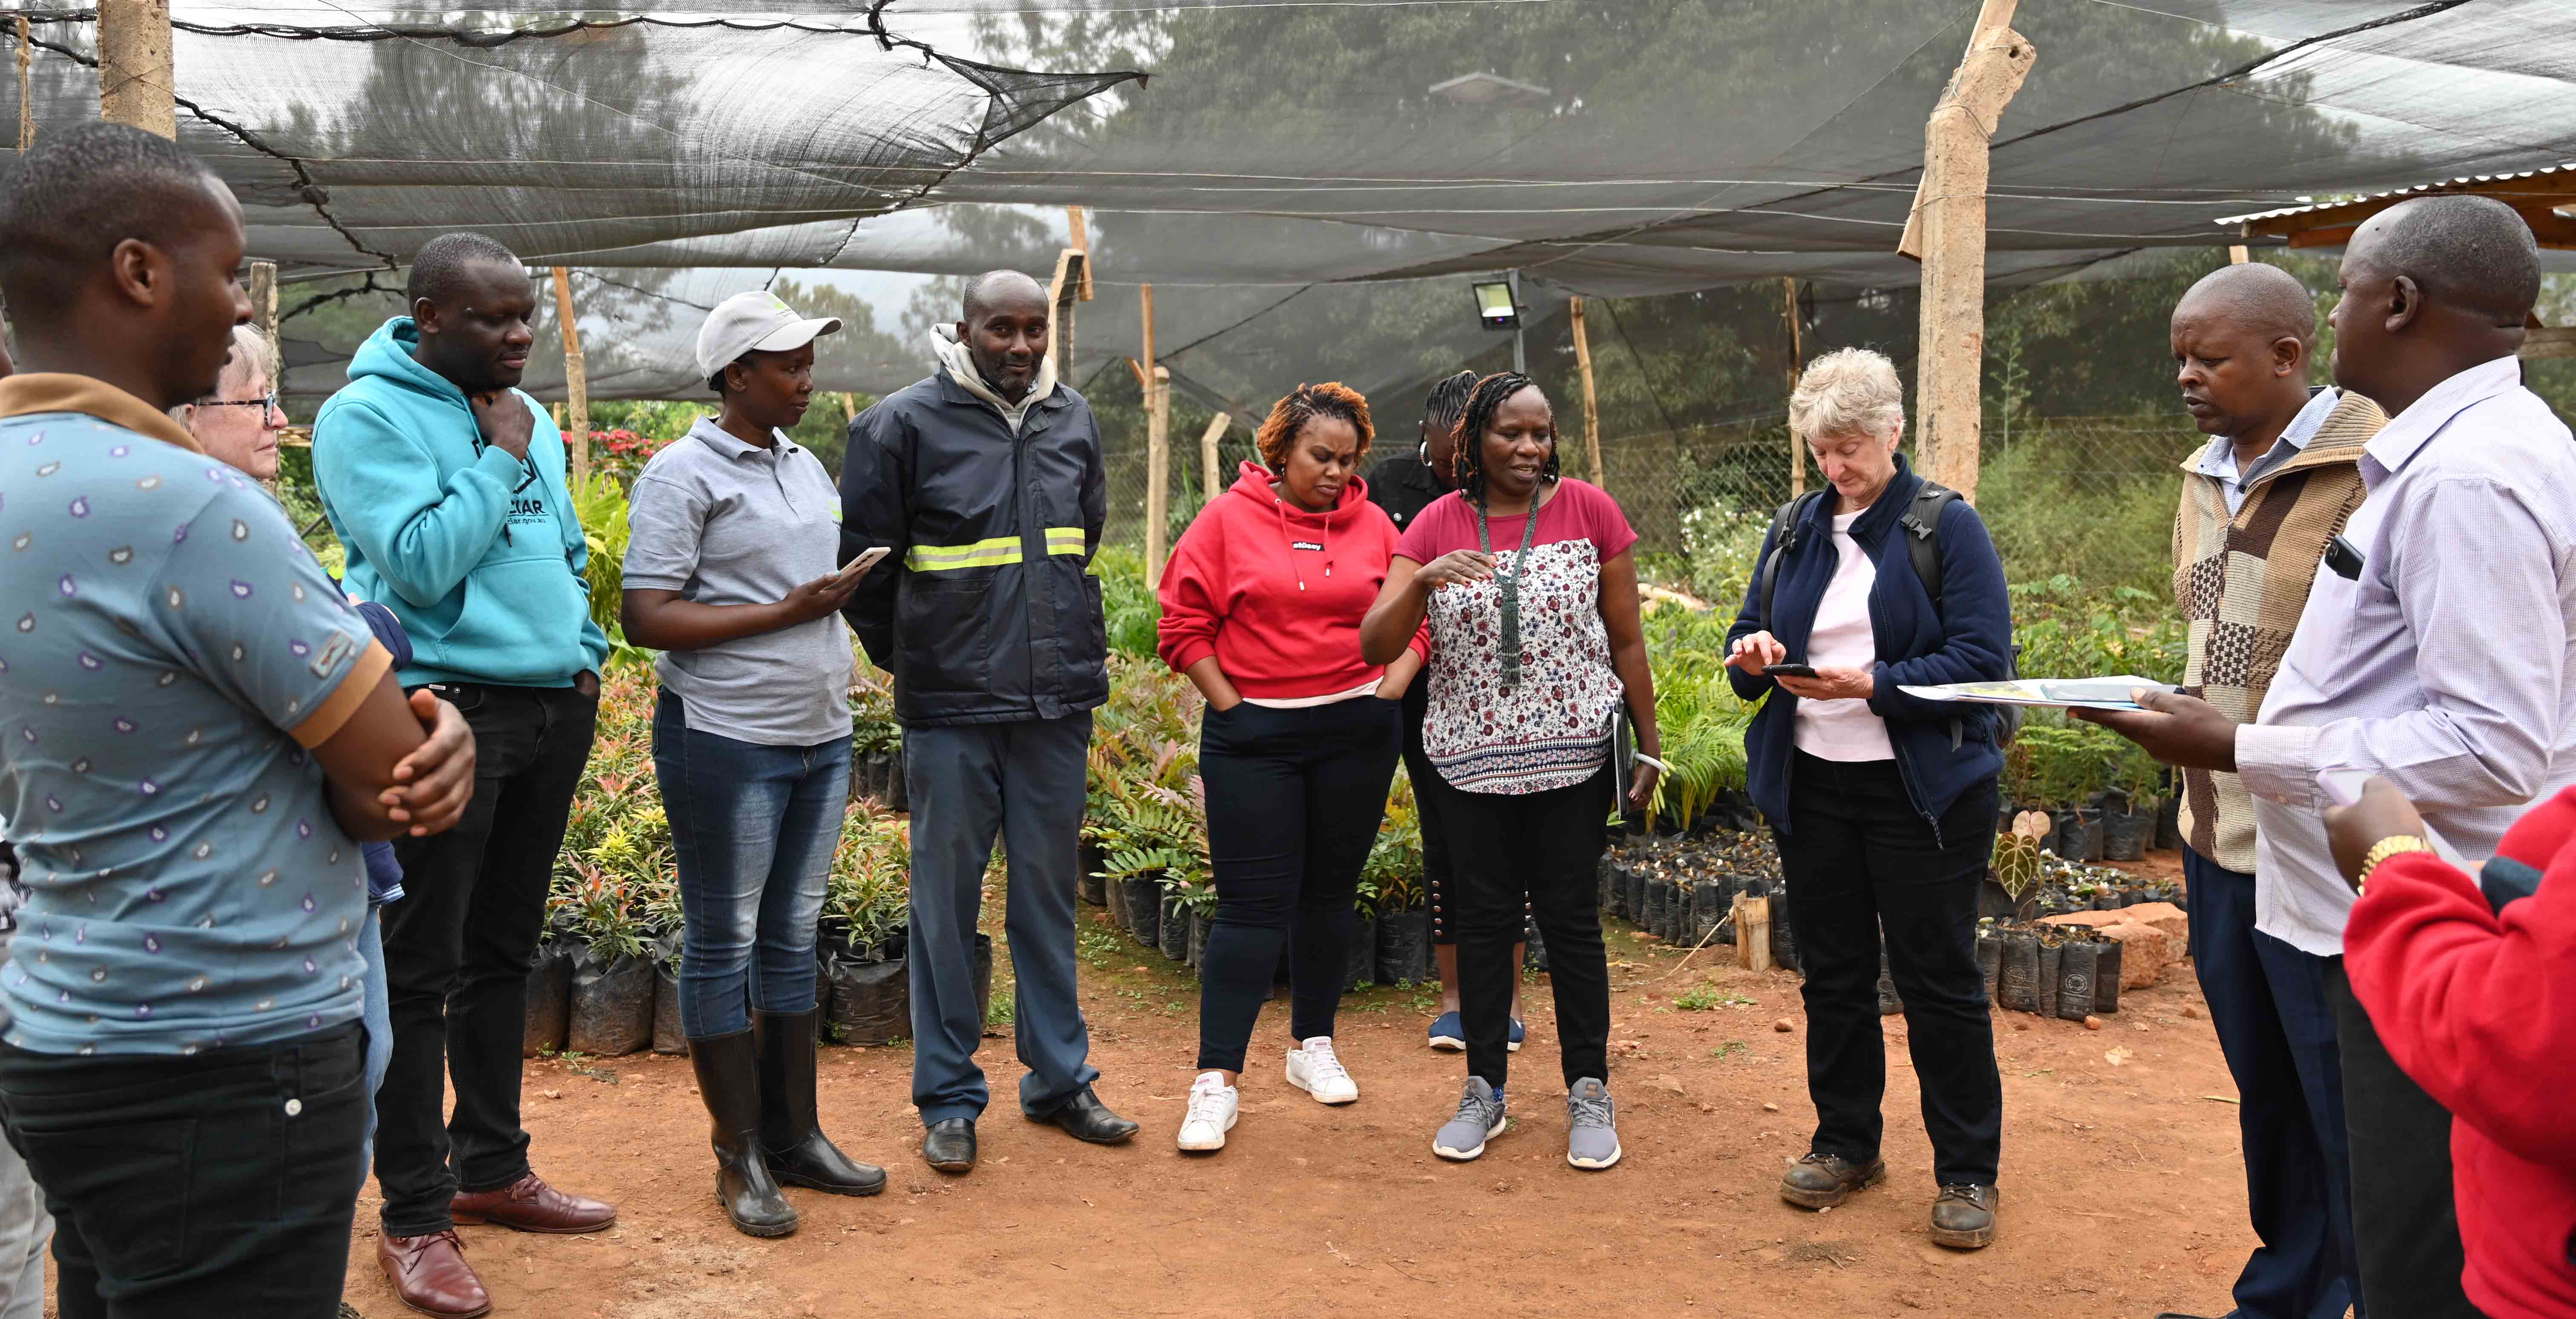 ACIAR staff, external reviewers, and farmers from Makueni county in Kenya listen intently as Prof Catherine Muthuri, ACIAR Project Leader and the Director and Regional Convener for East Africa at CIFOR-ICRAF, explains the App features.